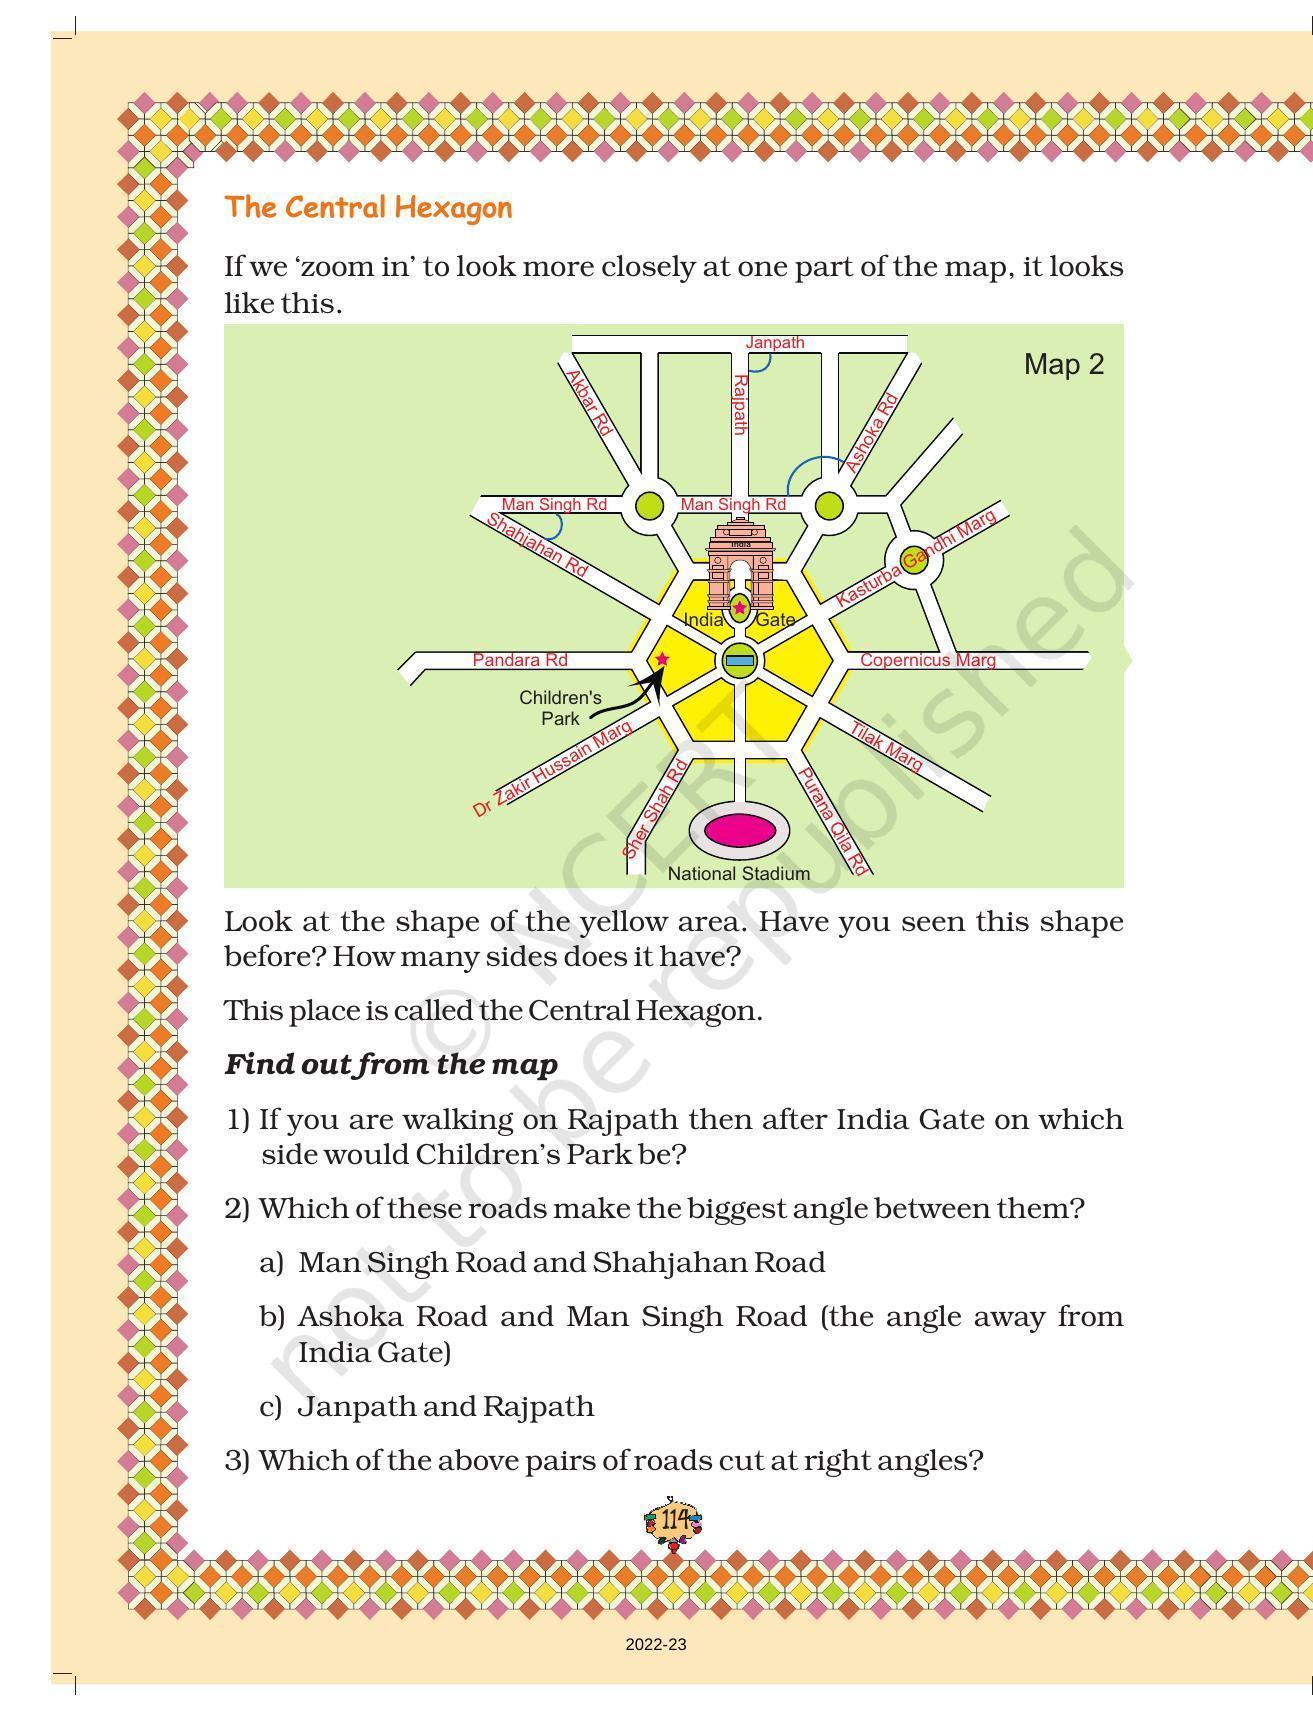 NCERT Book for Class 5 Maths Chapter 8 Mapping Your Way - Page 3